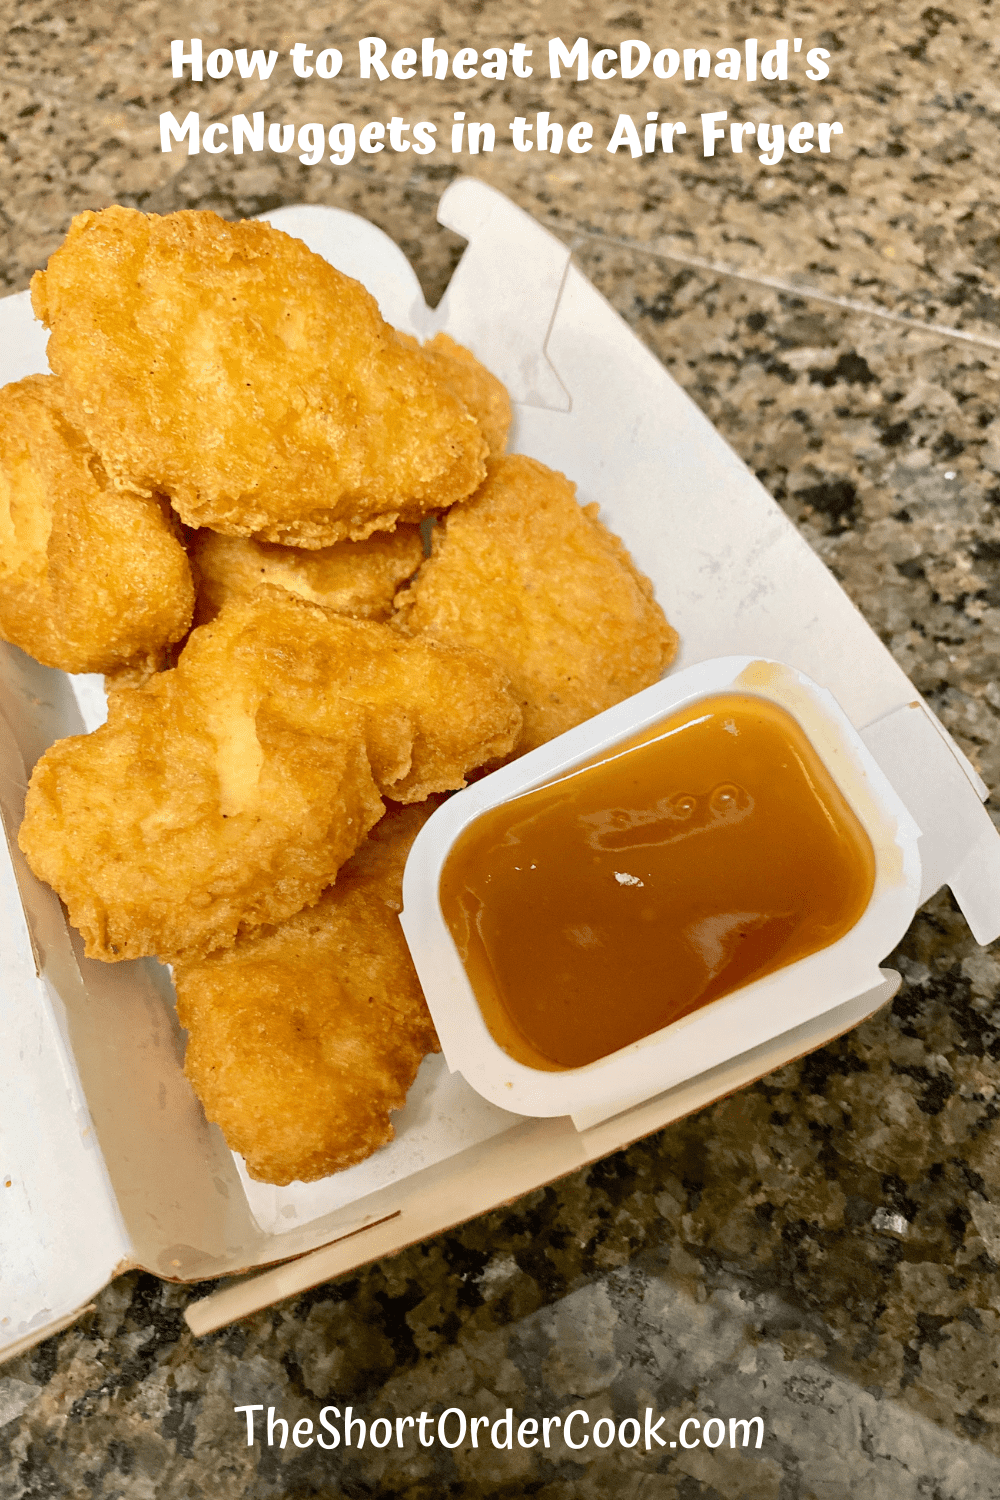 Boxed nuggets on the counter.